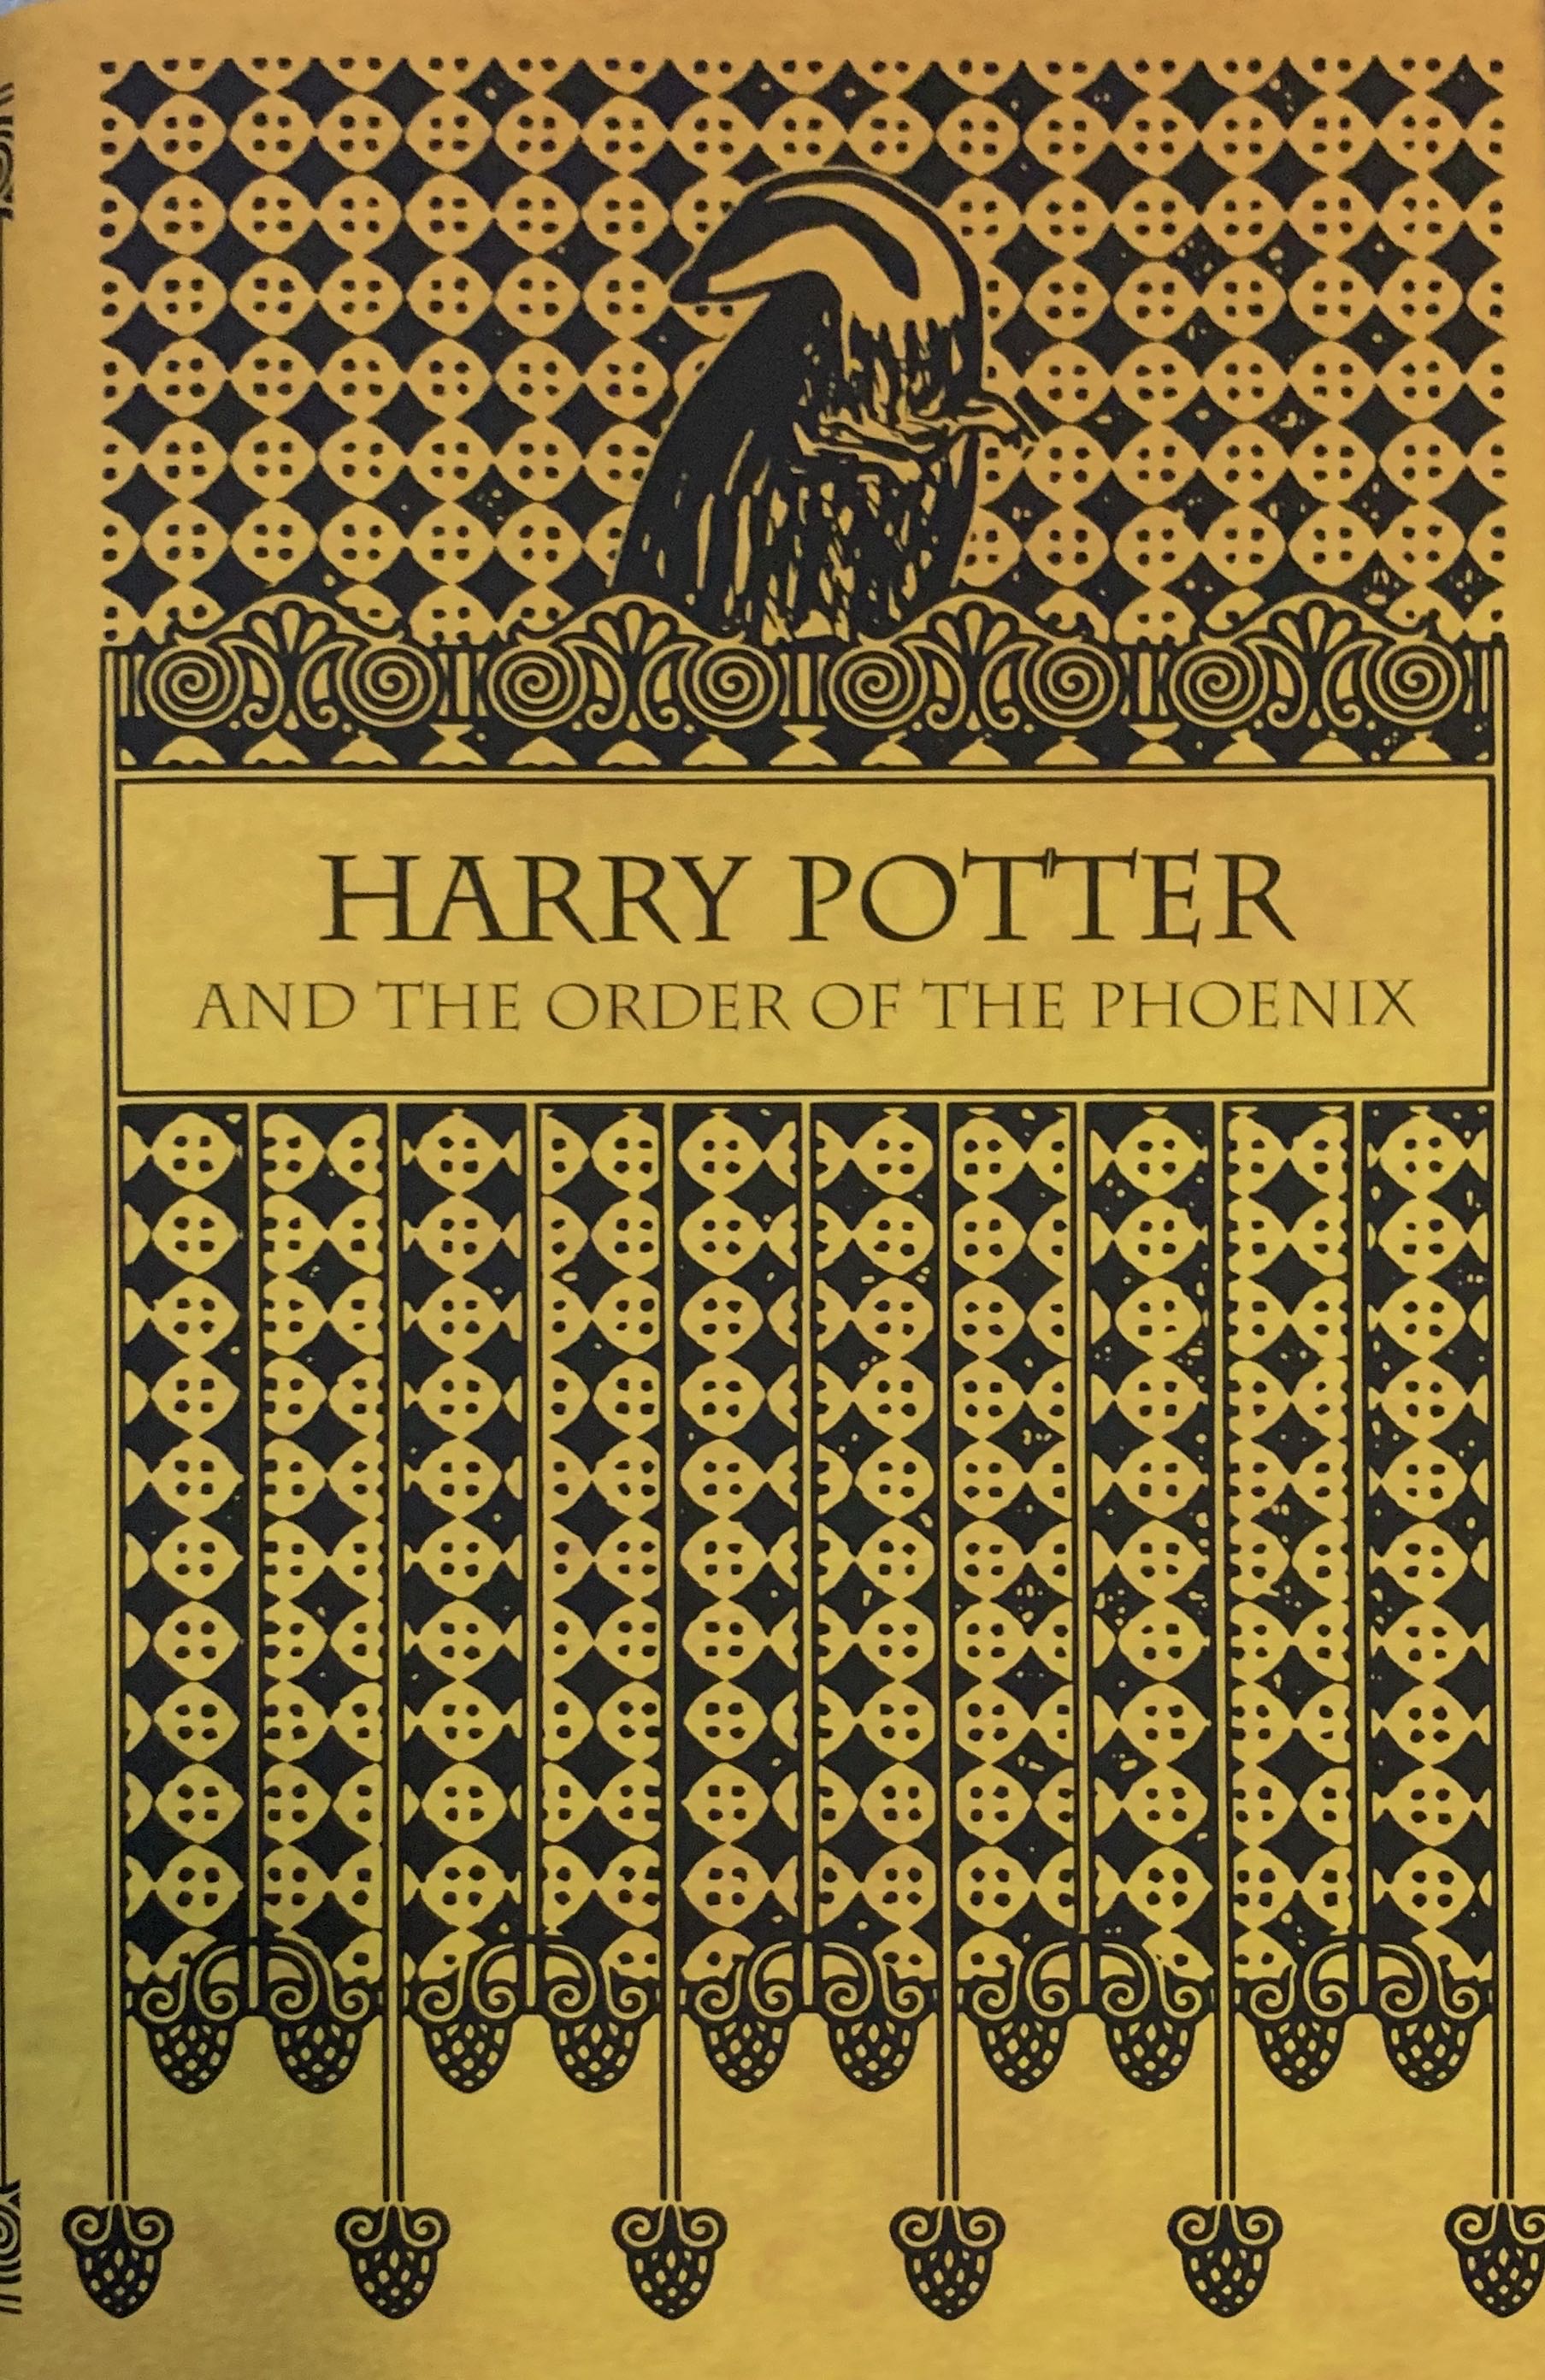 Harry Potter and the Order of the Phoenix - J. K. Rowling (Arthur A. Levine Books - Hardcover) book collectible [Barcode 9780439358064] - Main Image 3